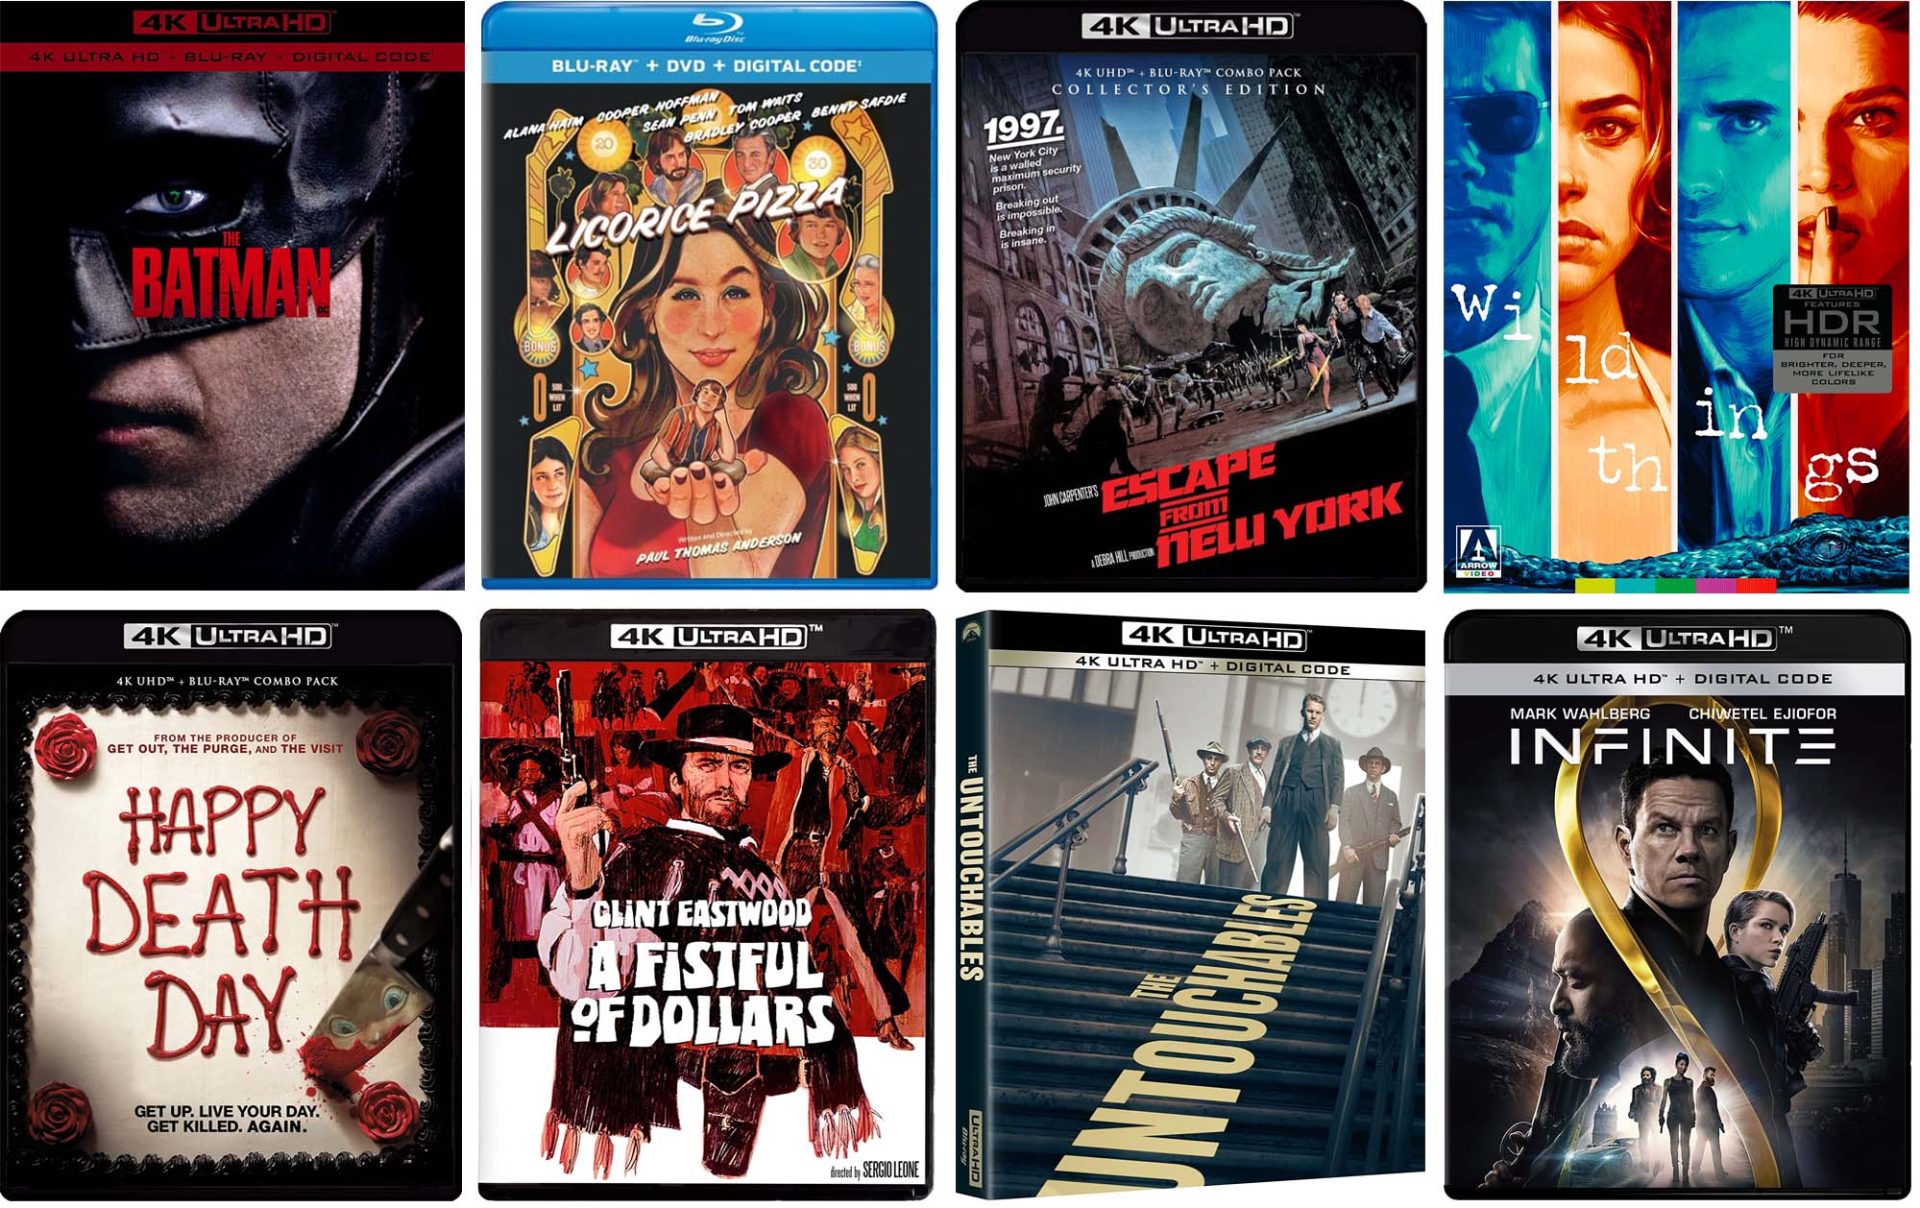 4k Ultra HD Bluray Releases In May HD Report